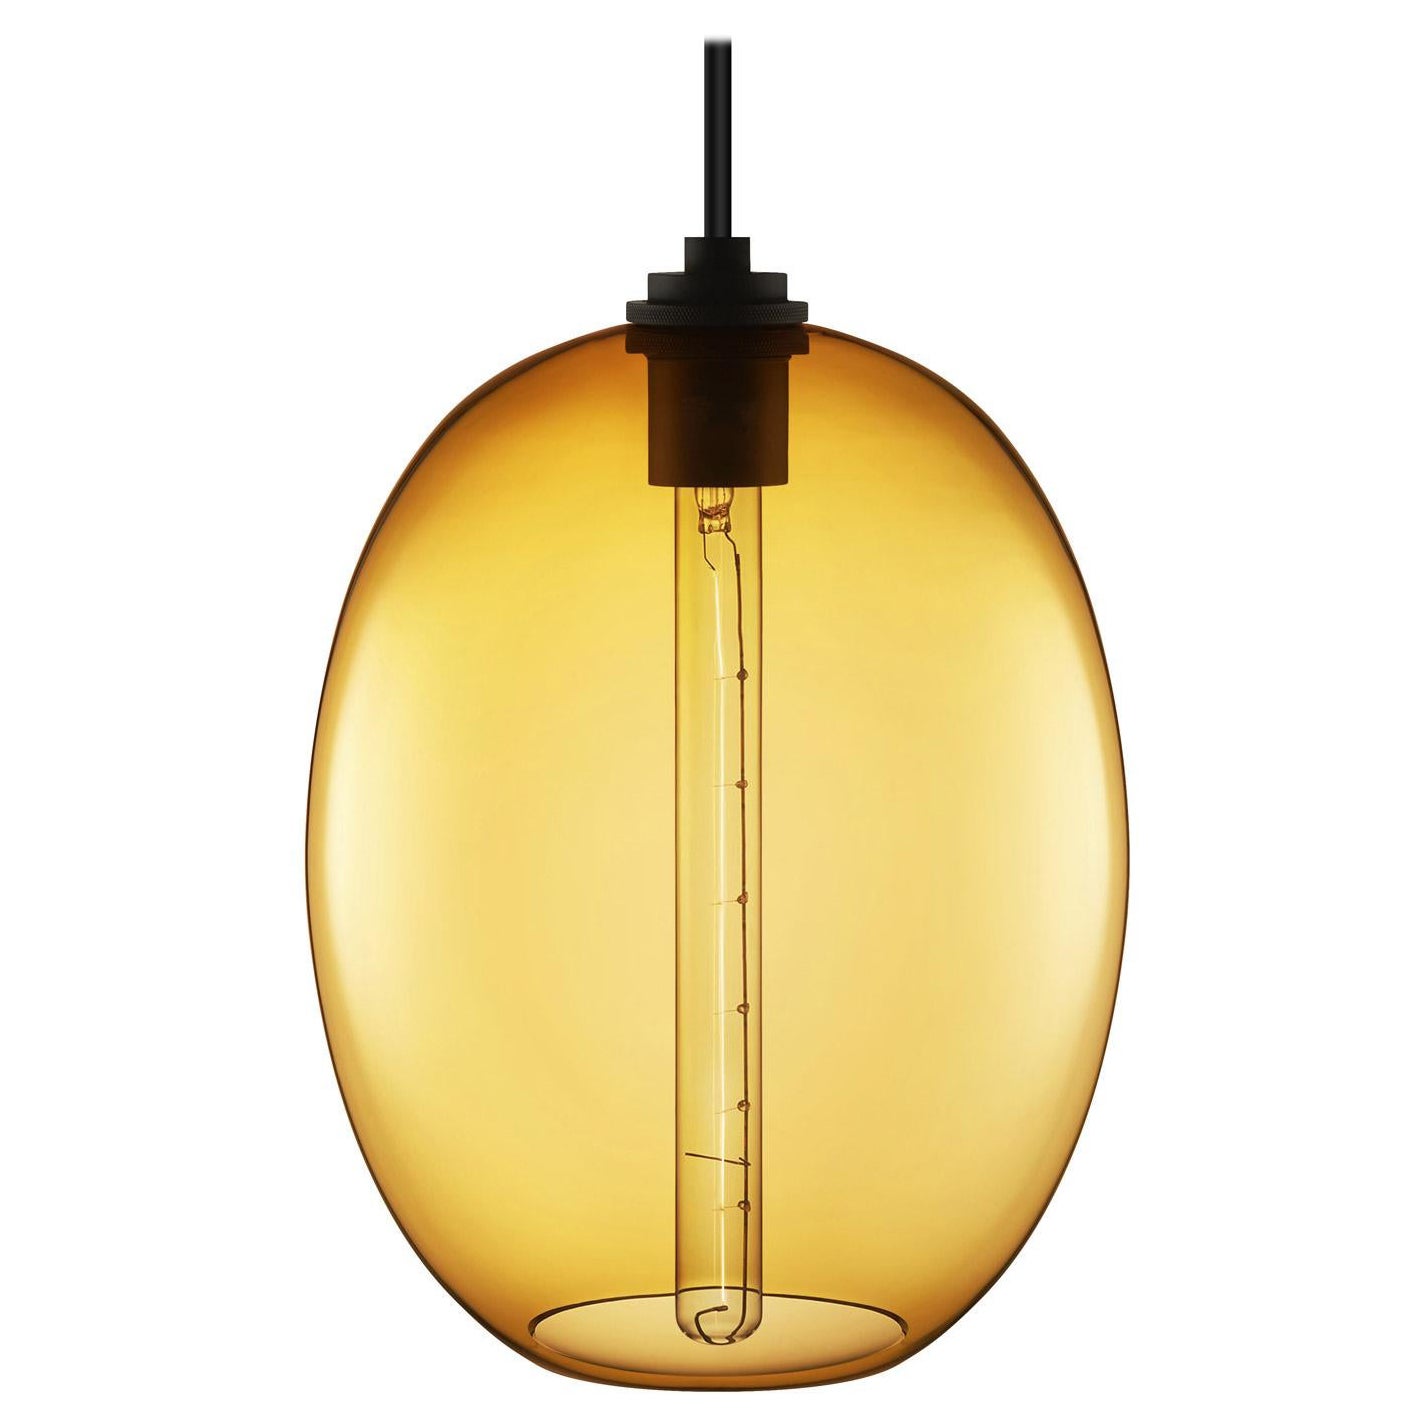 When paired together, the brilliant proportions of the Grand and Petite Ellipse pendants complement one another to create an elegant and distinctive design. Every single glass pendant light that comes from Niche is hand-blown by real human beings in